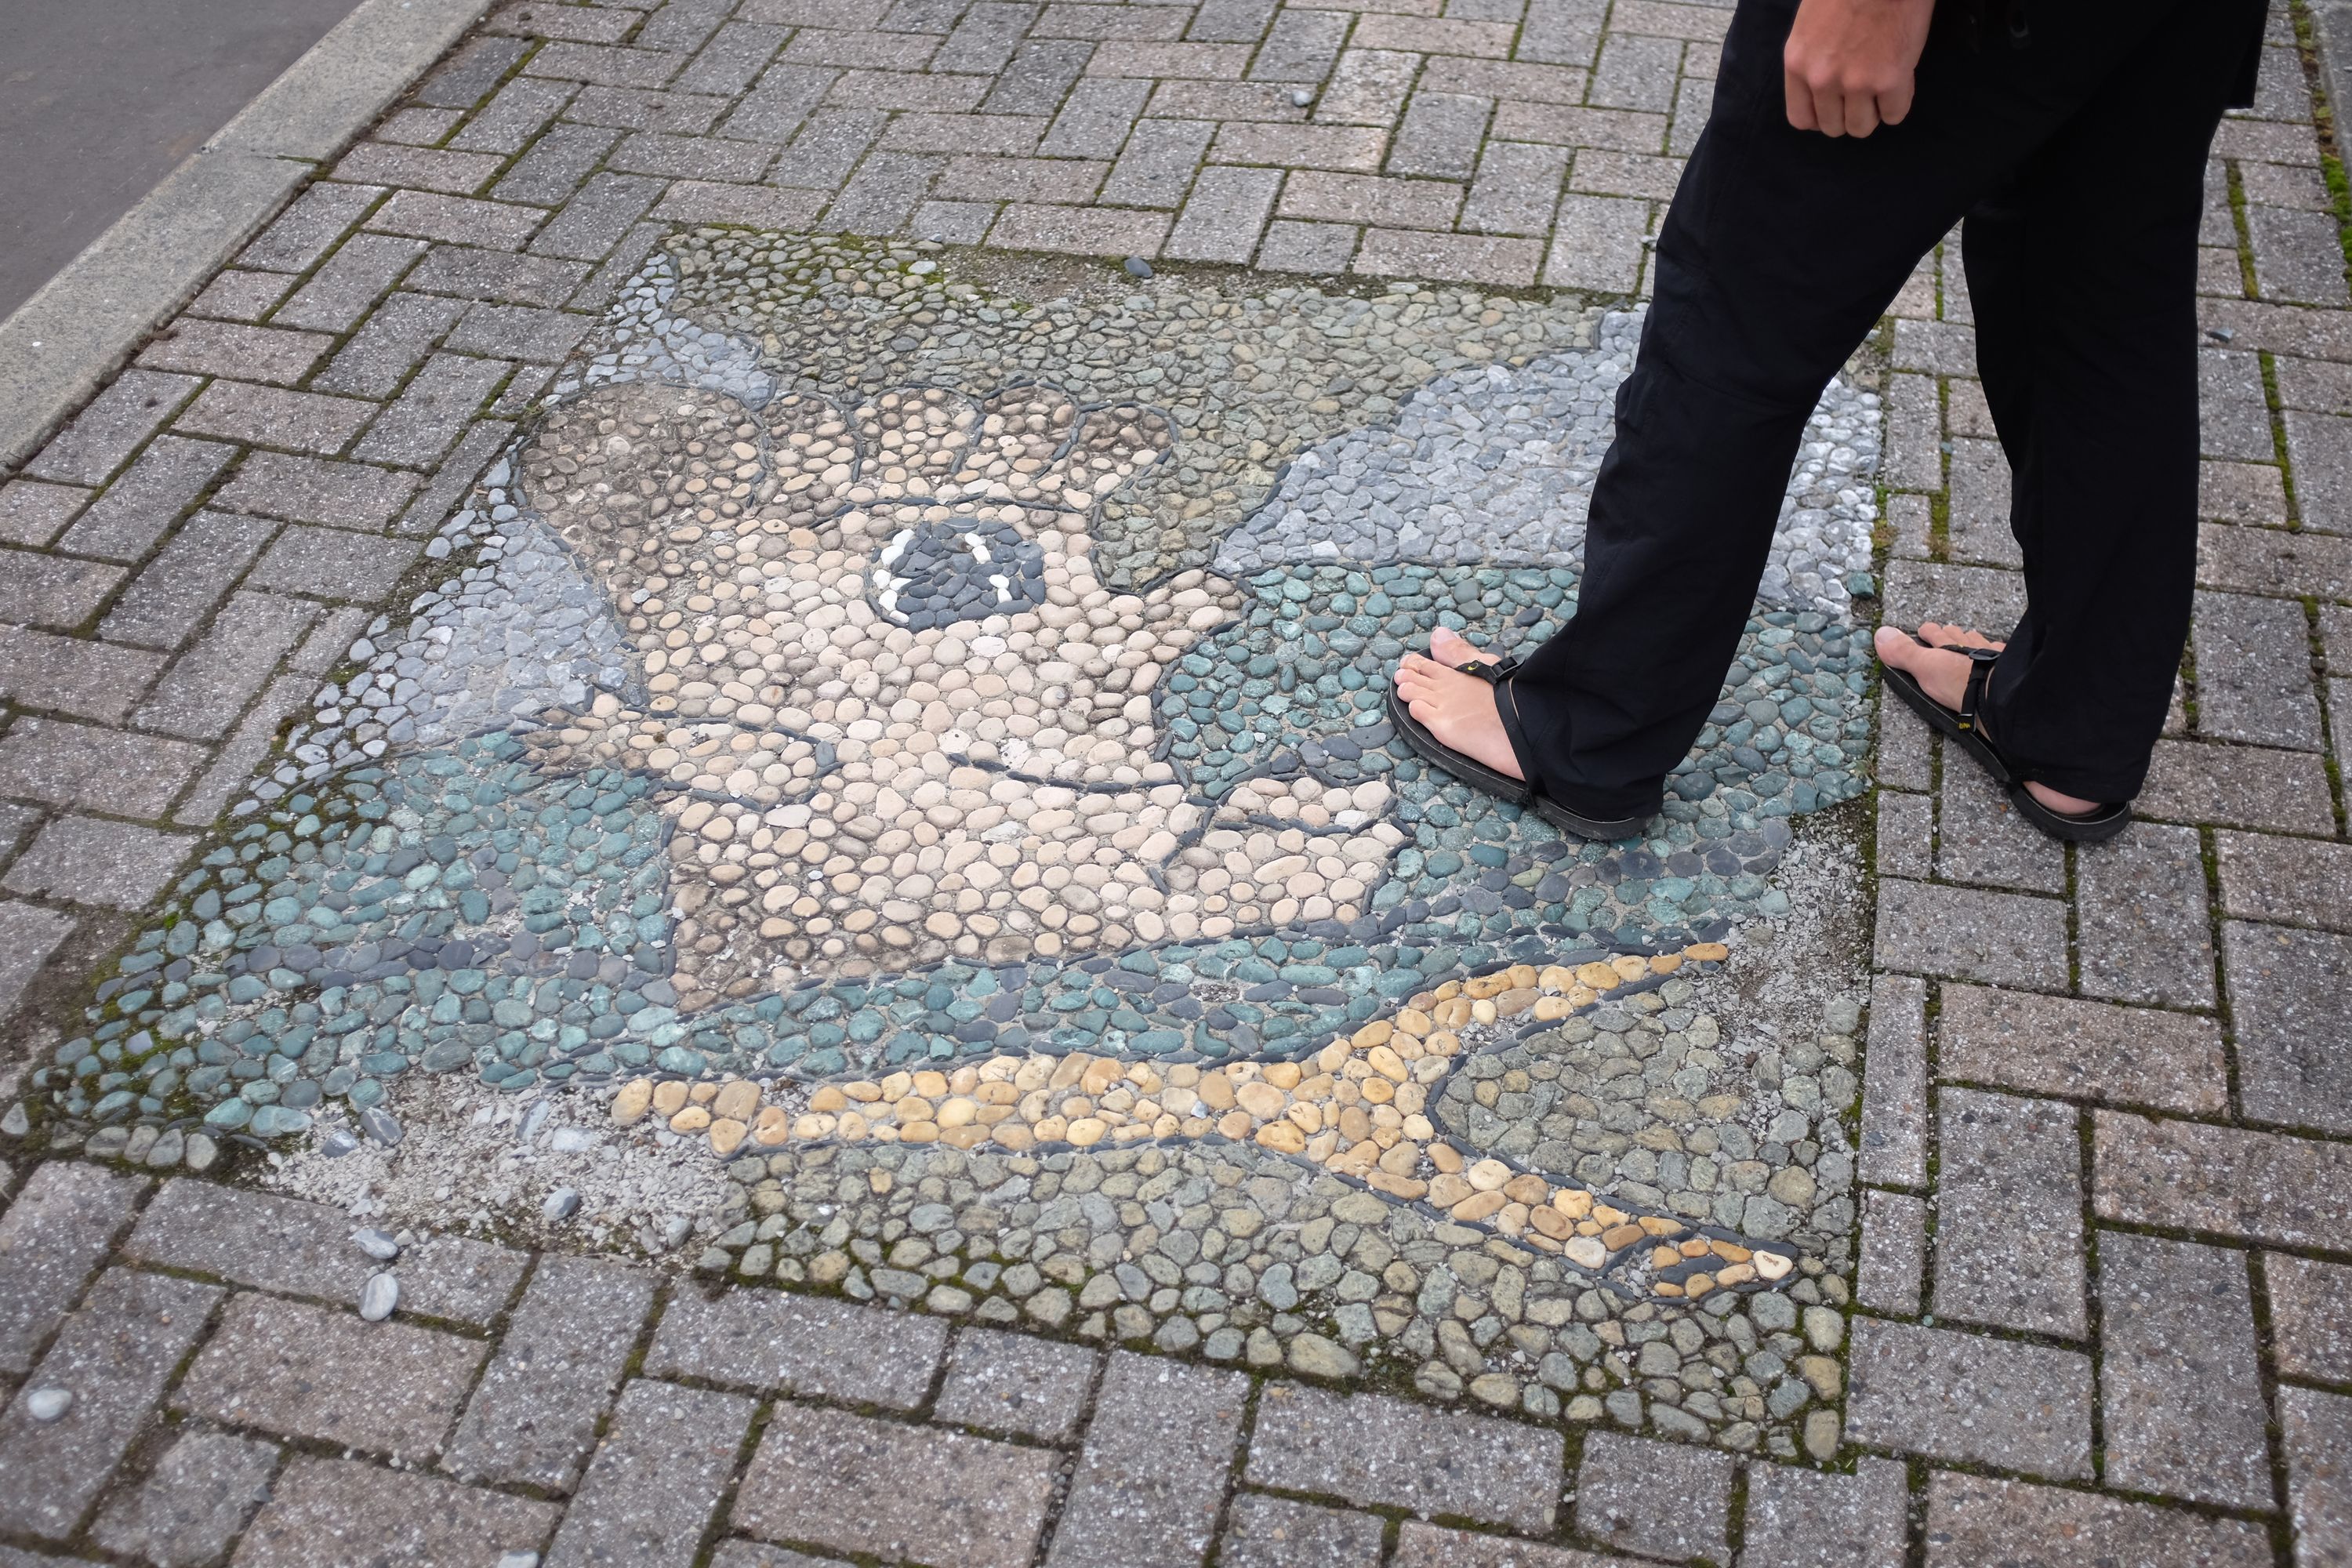 Gabor stands by a mosaic of the foot in sandals, visible from the waist down.